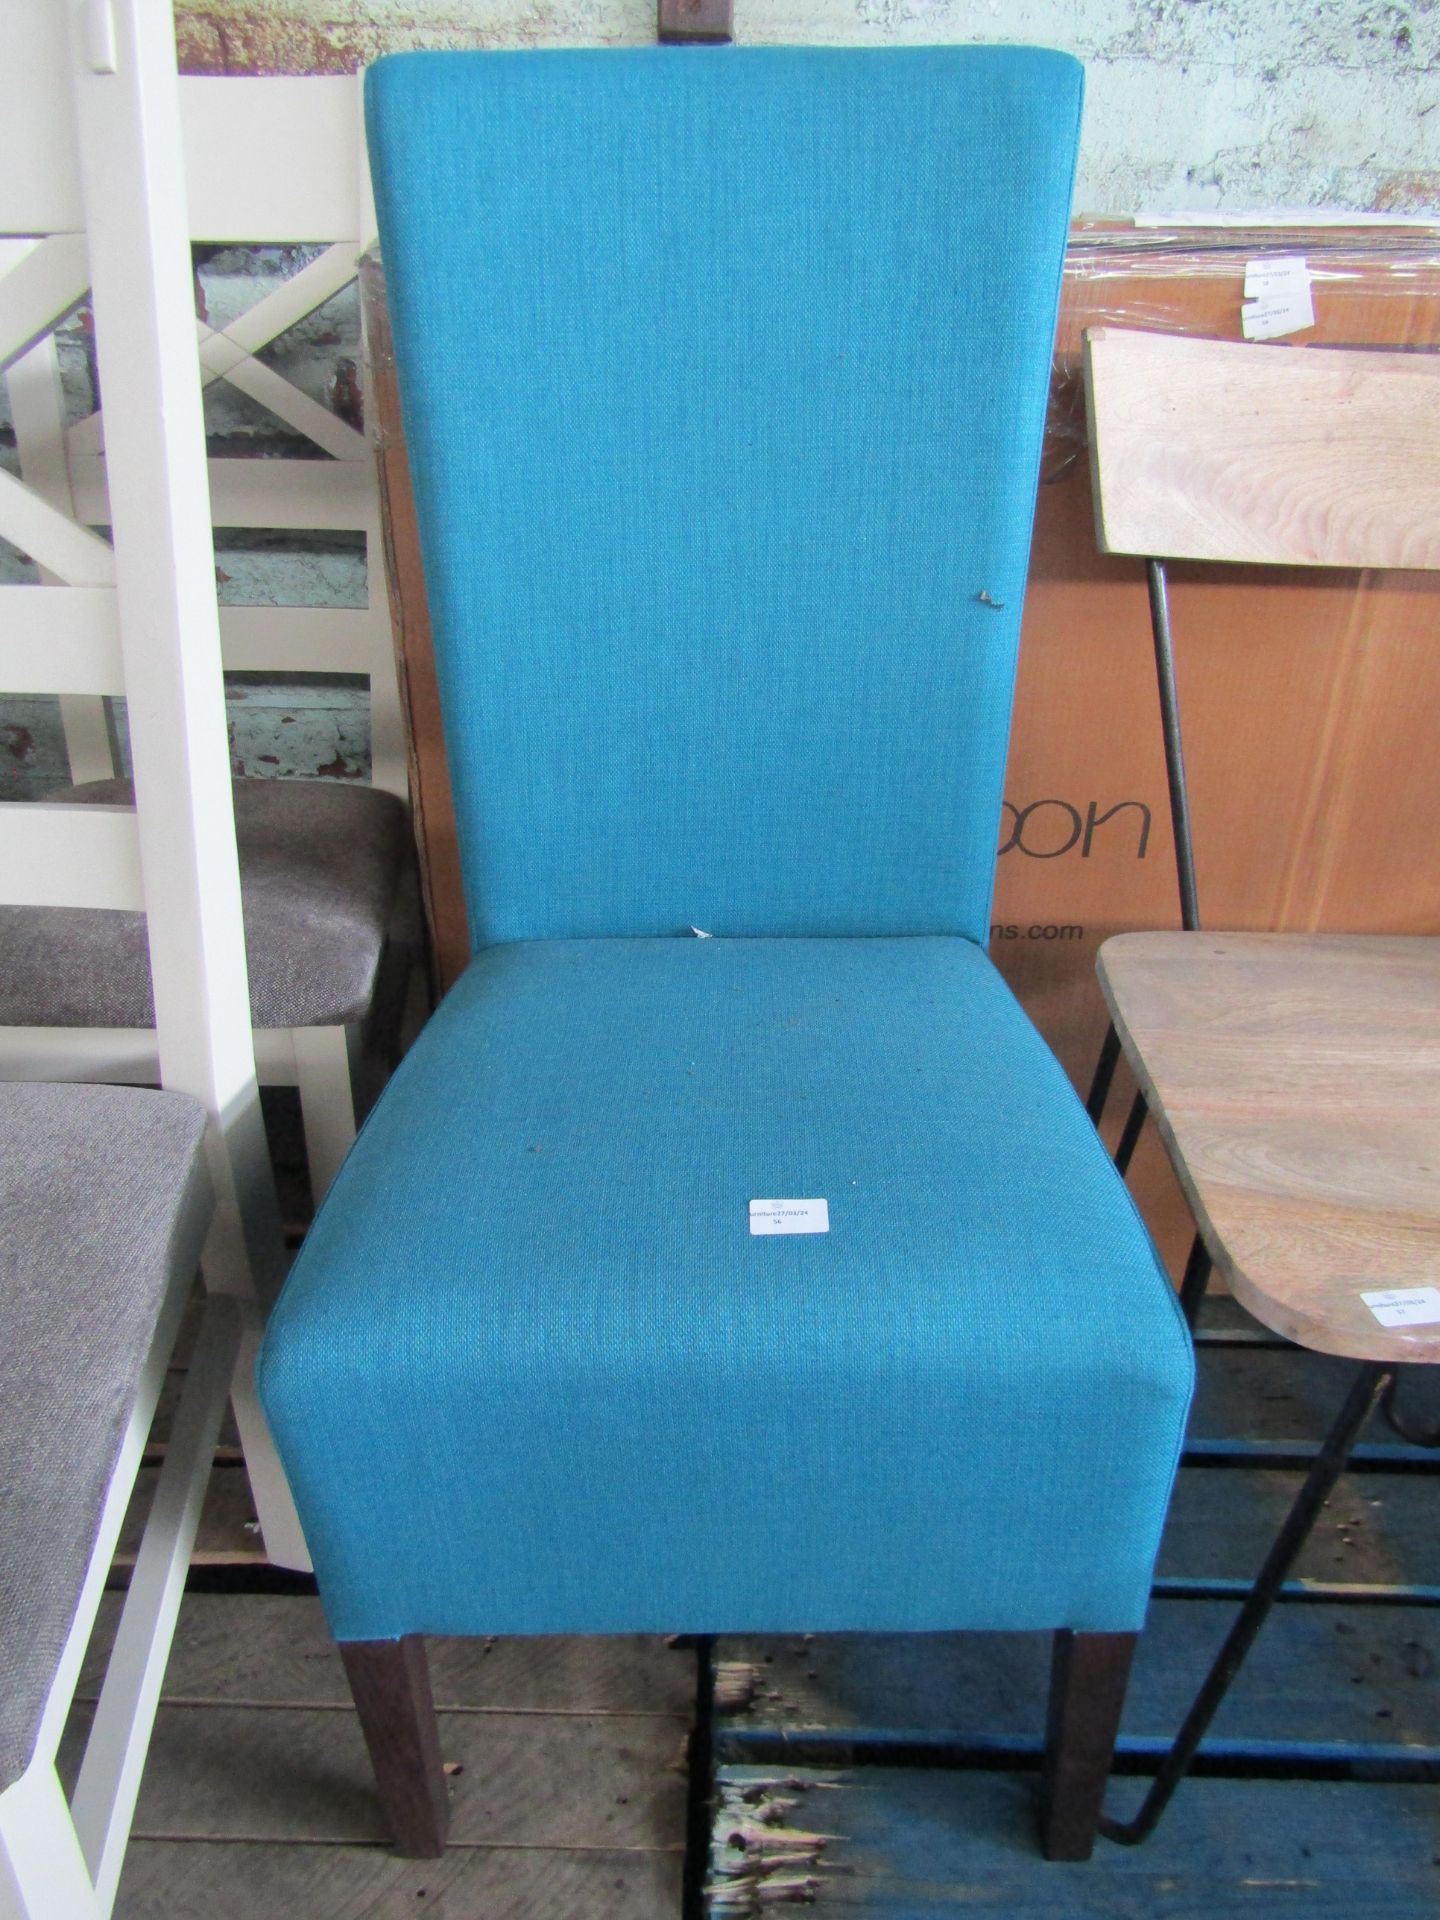 Bentley Designs Nina Walnut Teal Fabric Wing Back Dining Chair RRP 293About the Product(s)Bentley - Image 2 of 2